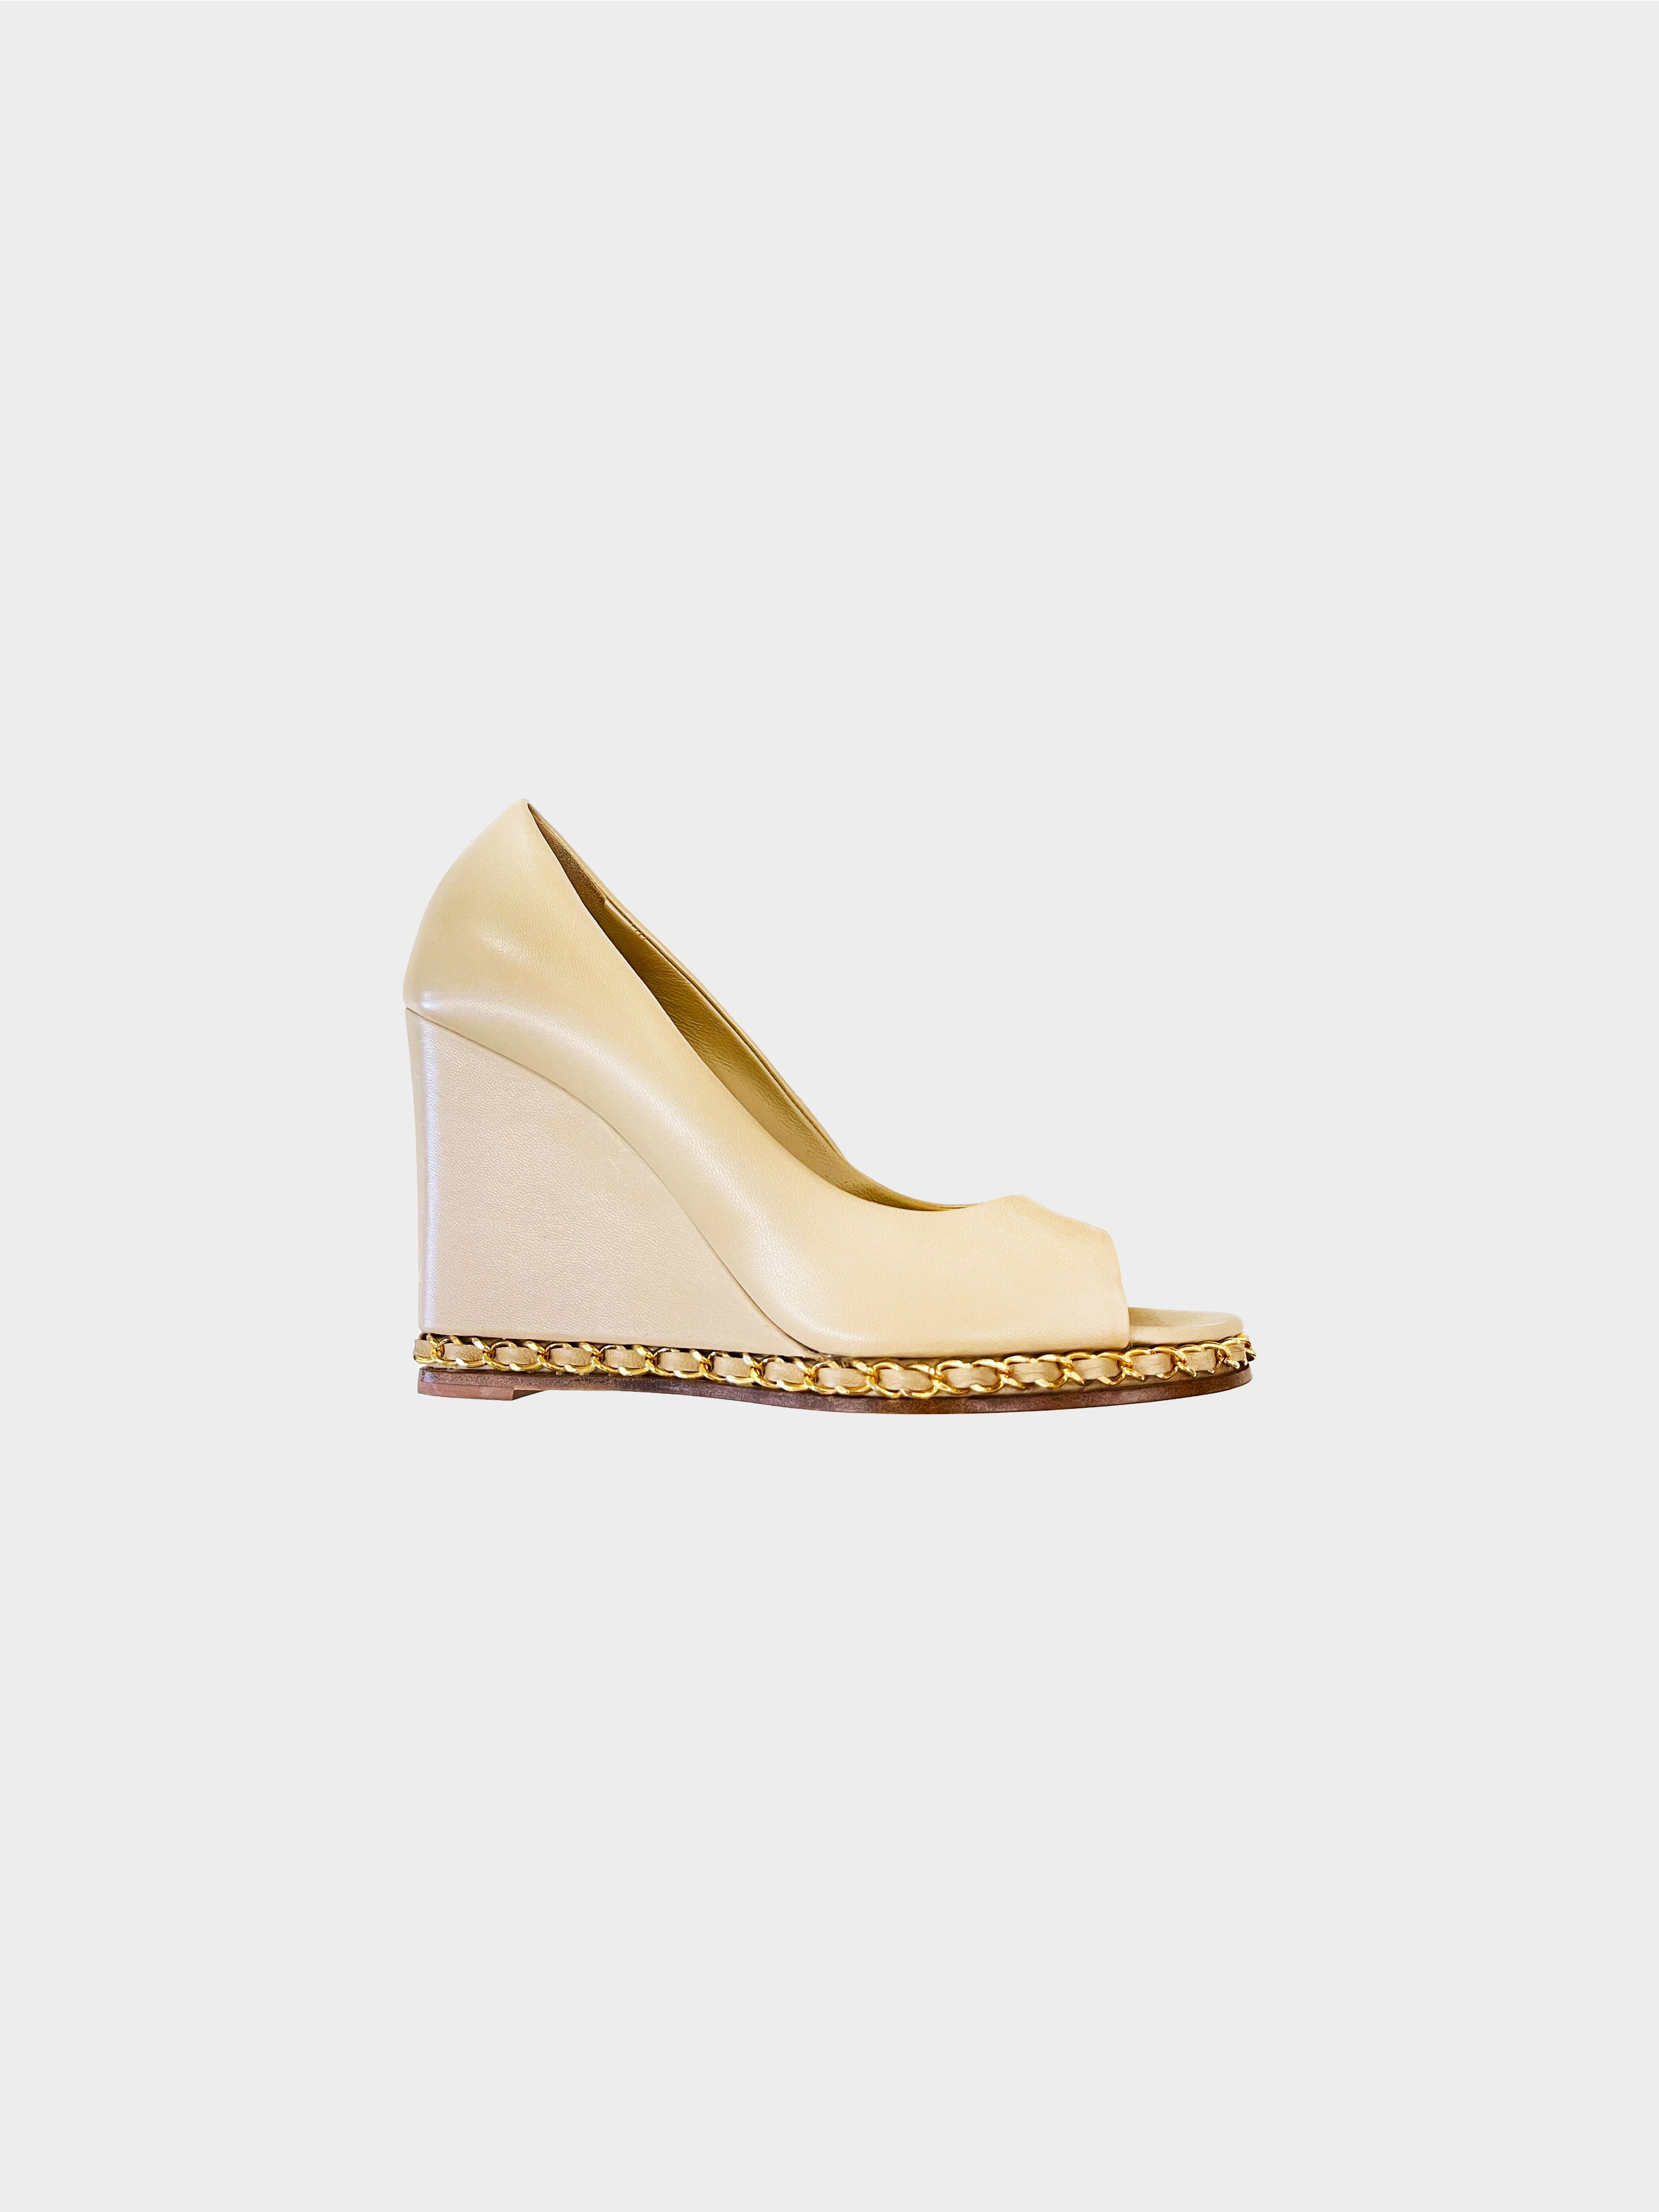 Chanel Spring 2011 Beige Open Toe Chain Link Wedge Sandals